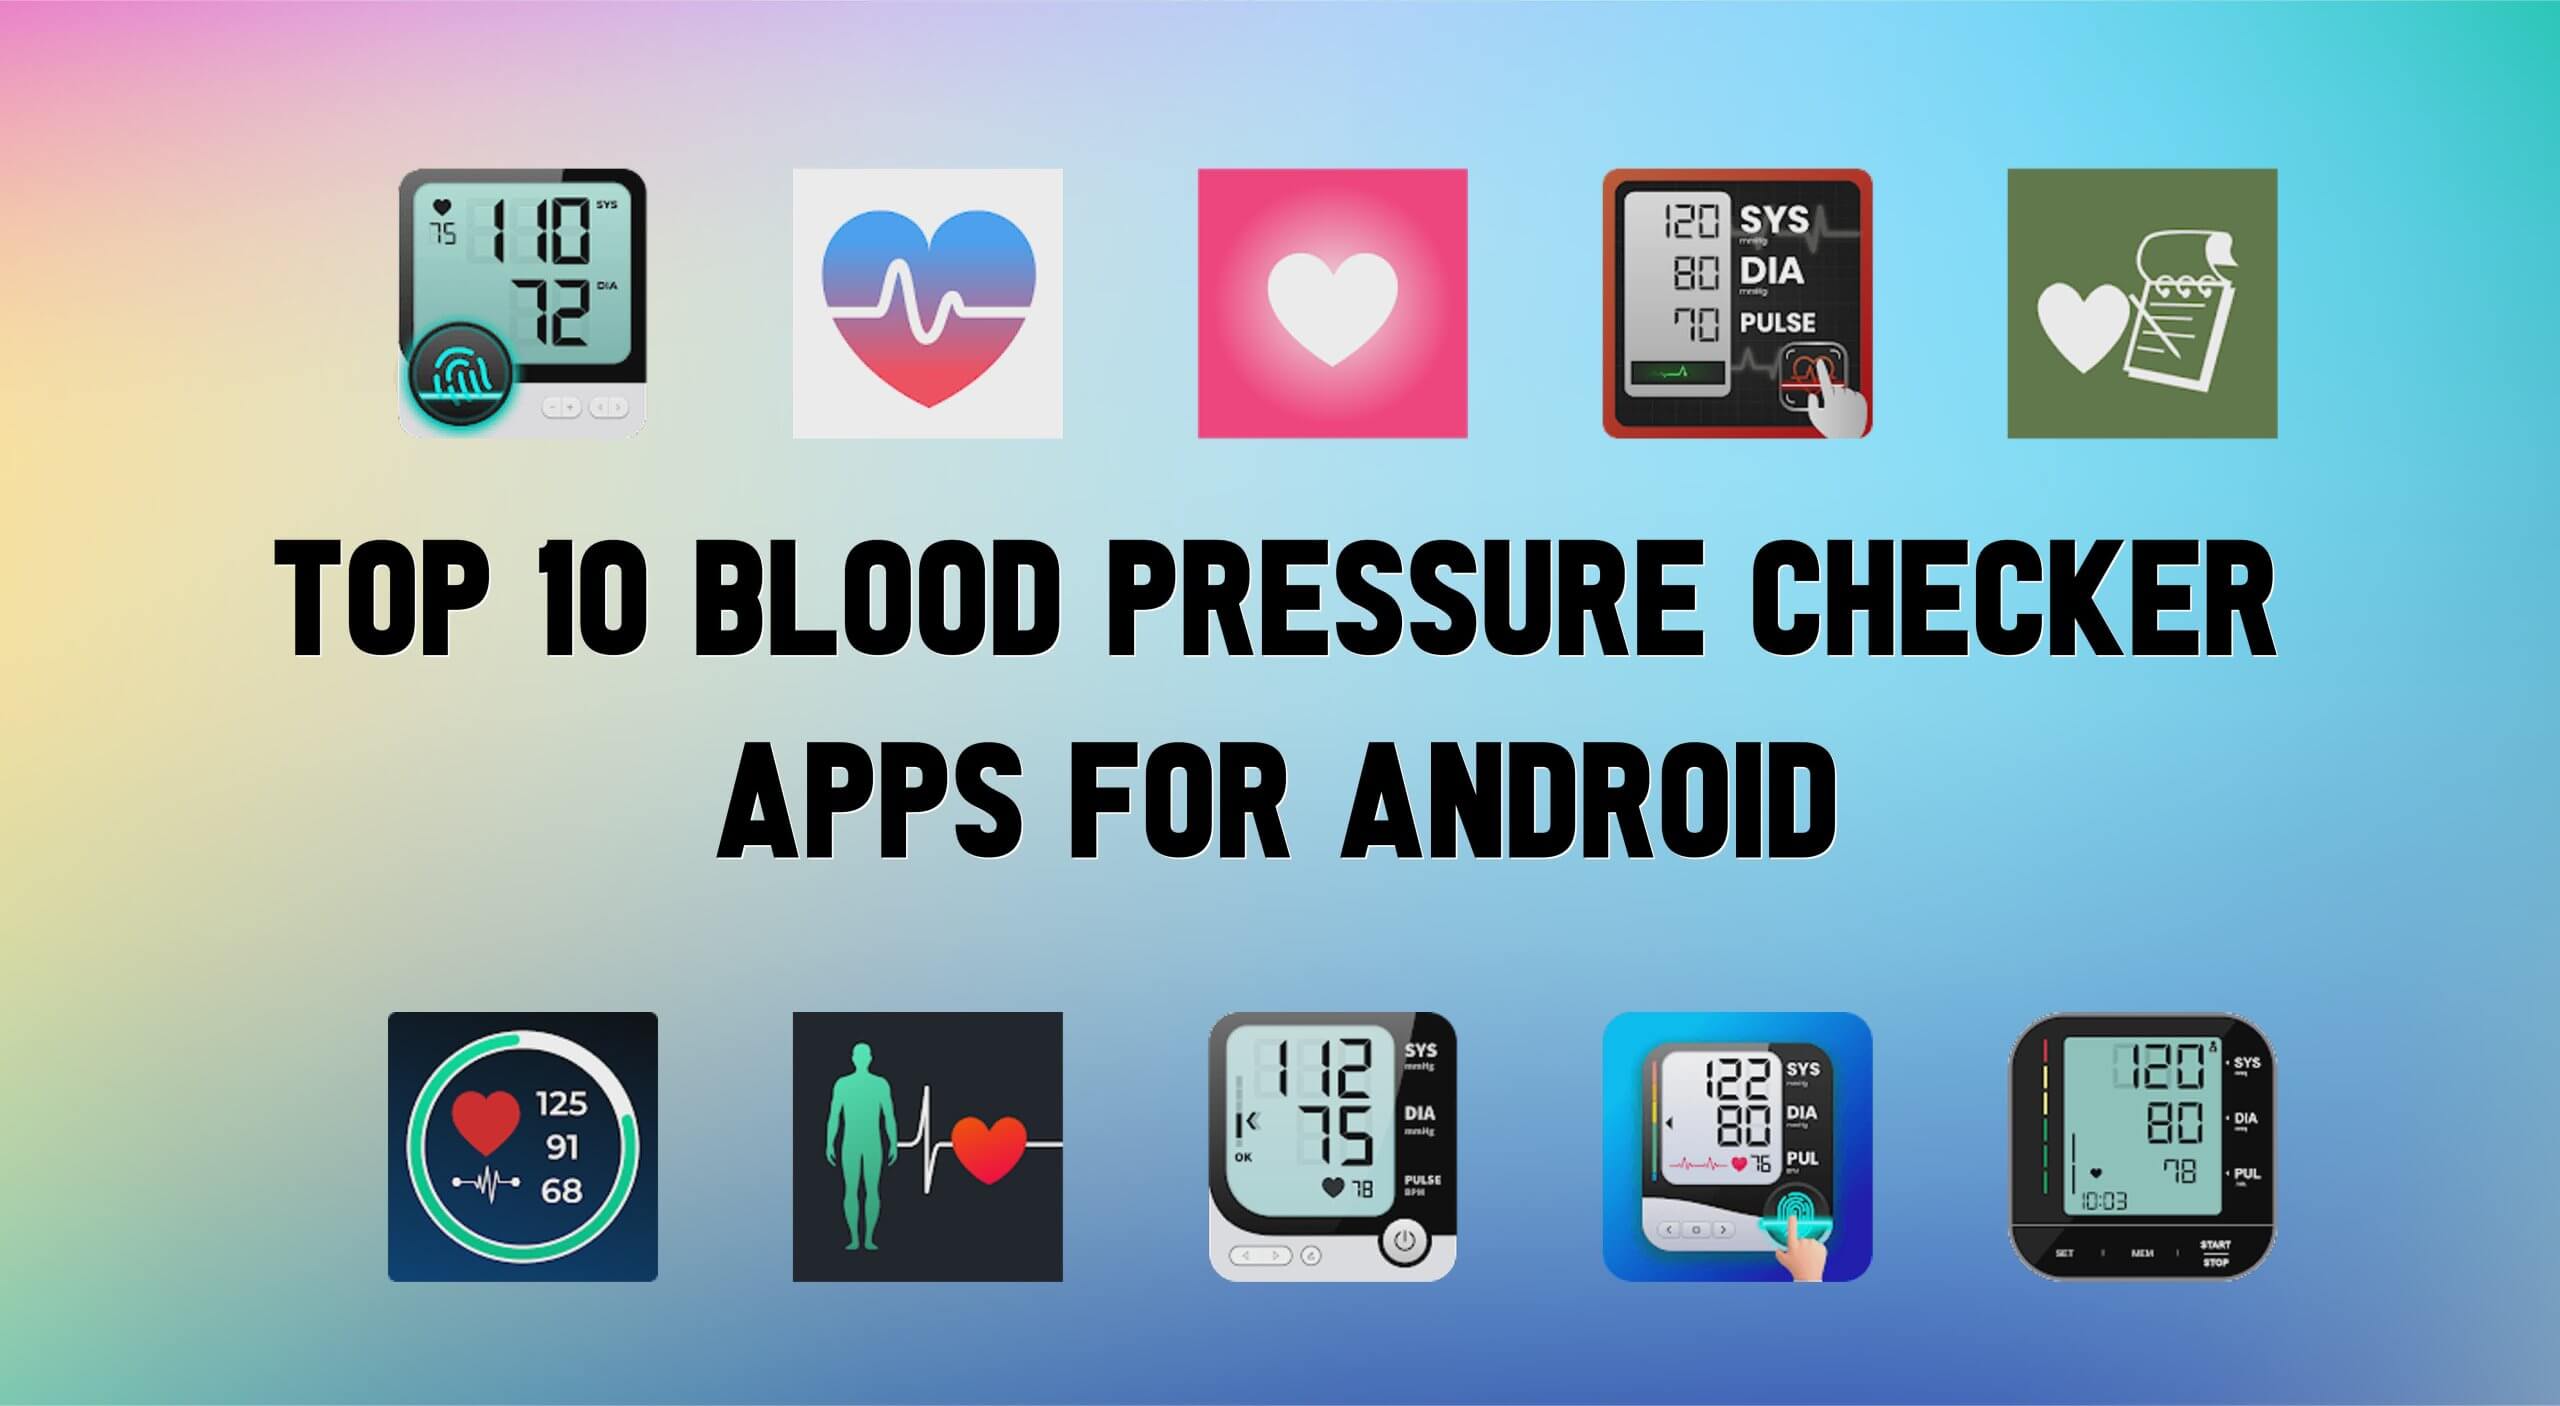 Best Blood Pressure Checker Apps For Android